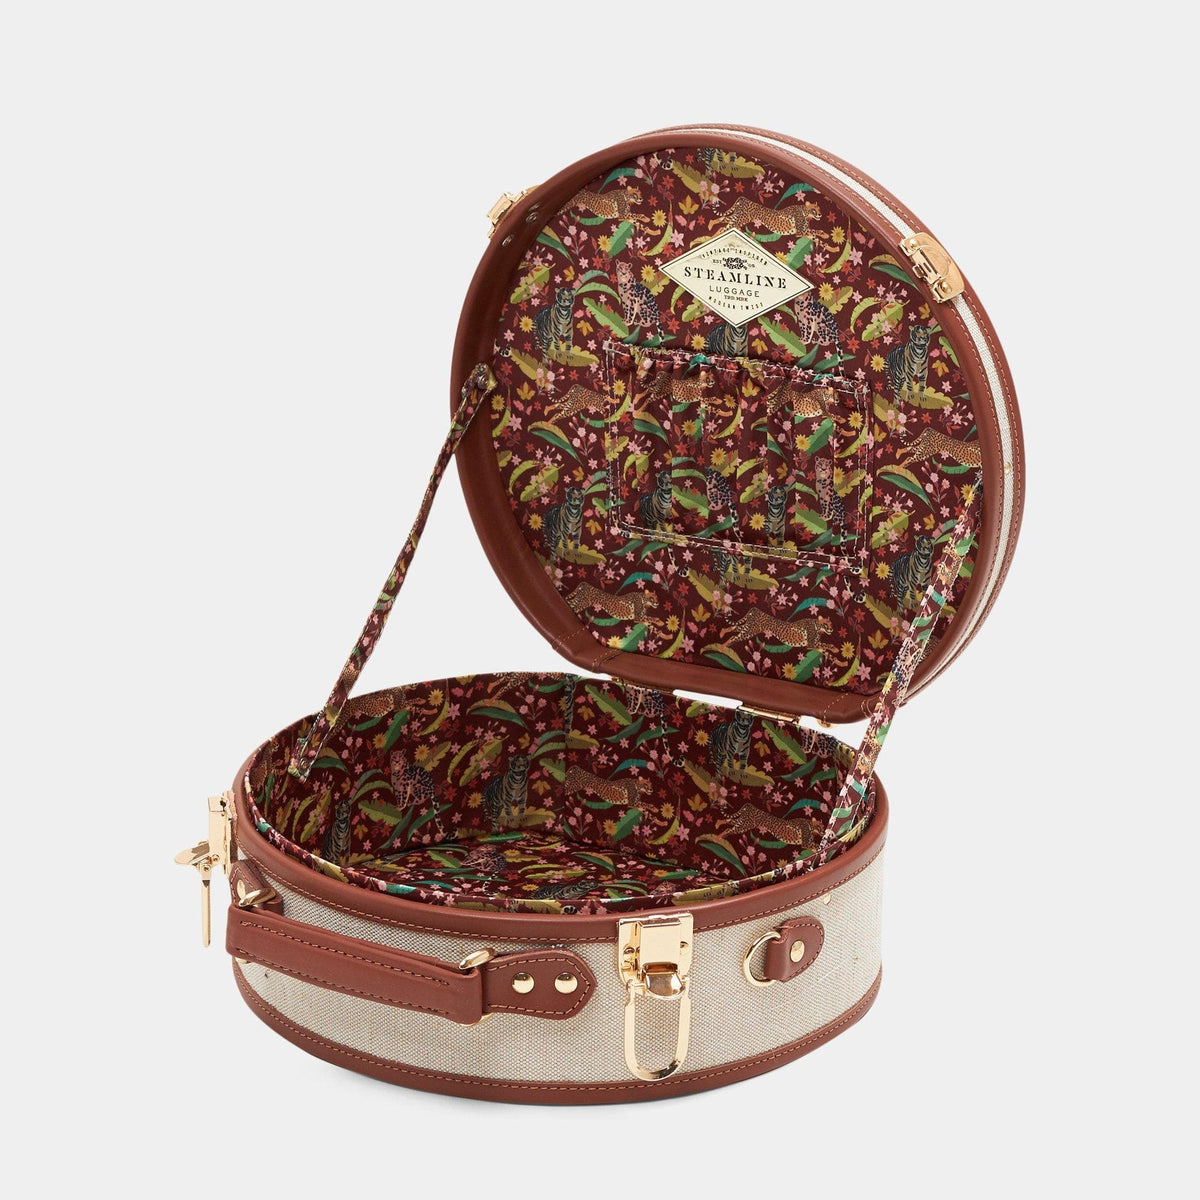 The Editor - Brown Hatbox Small Hatbox Small Steamline Luggage 